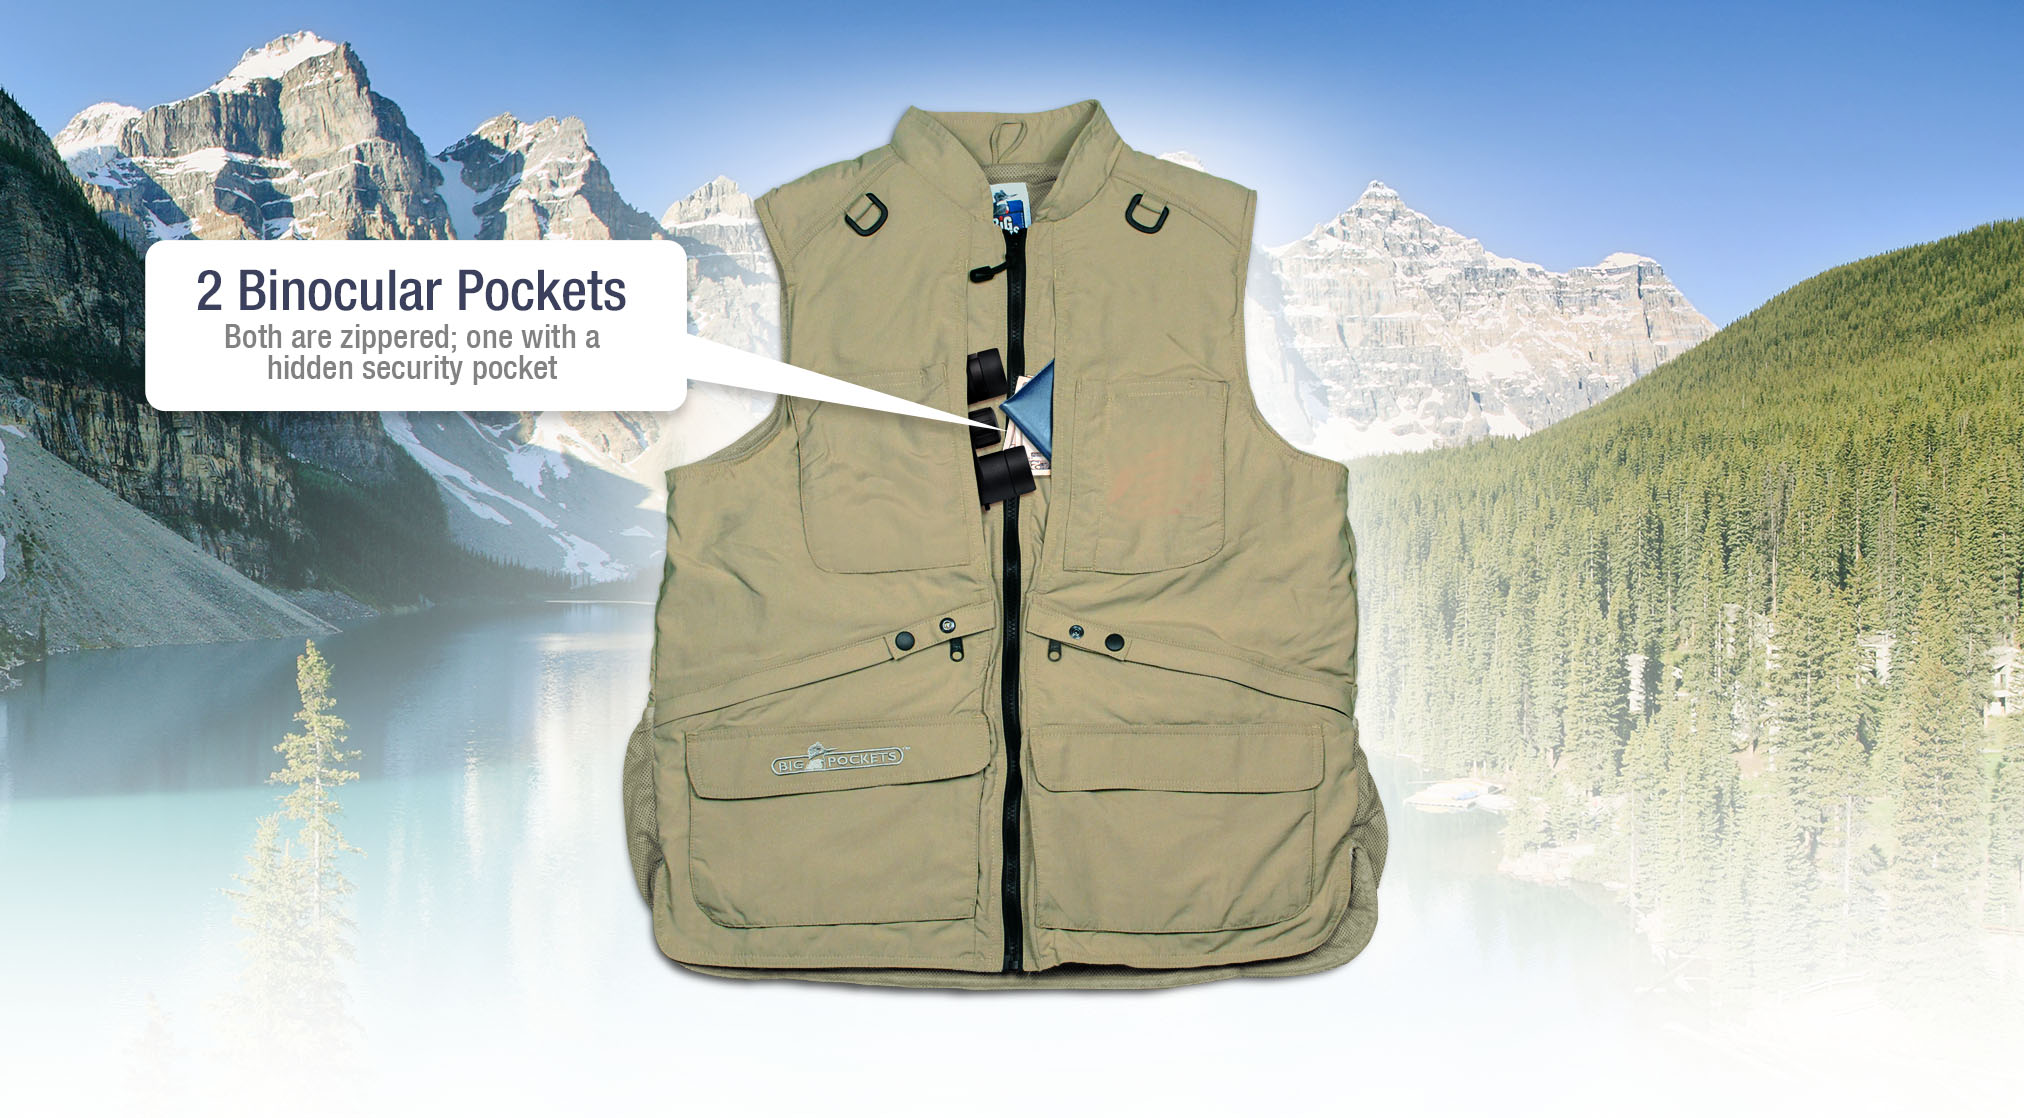 Zippered Chest Pockets. Both are zippered; one with a hidden security pocket